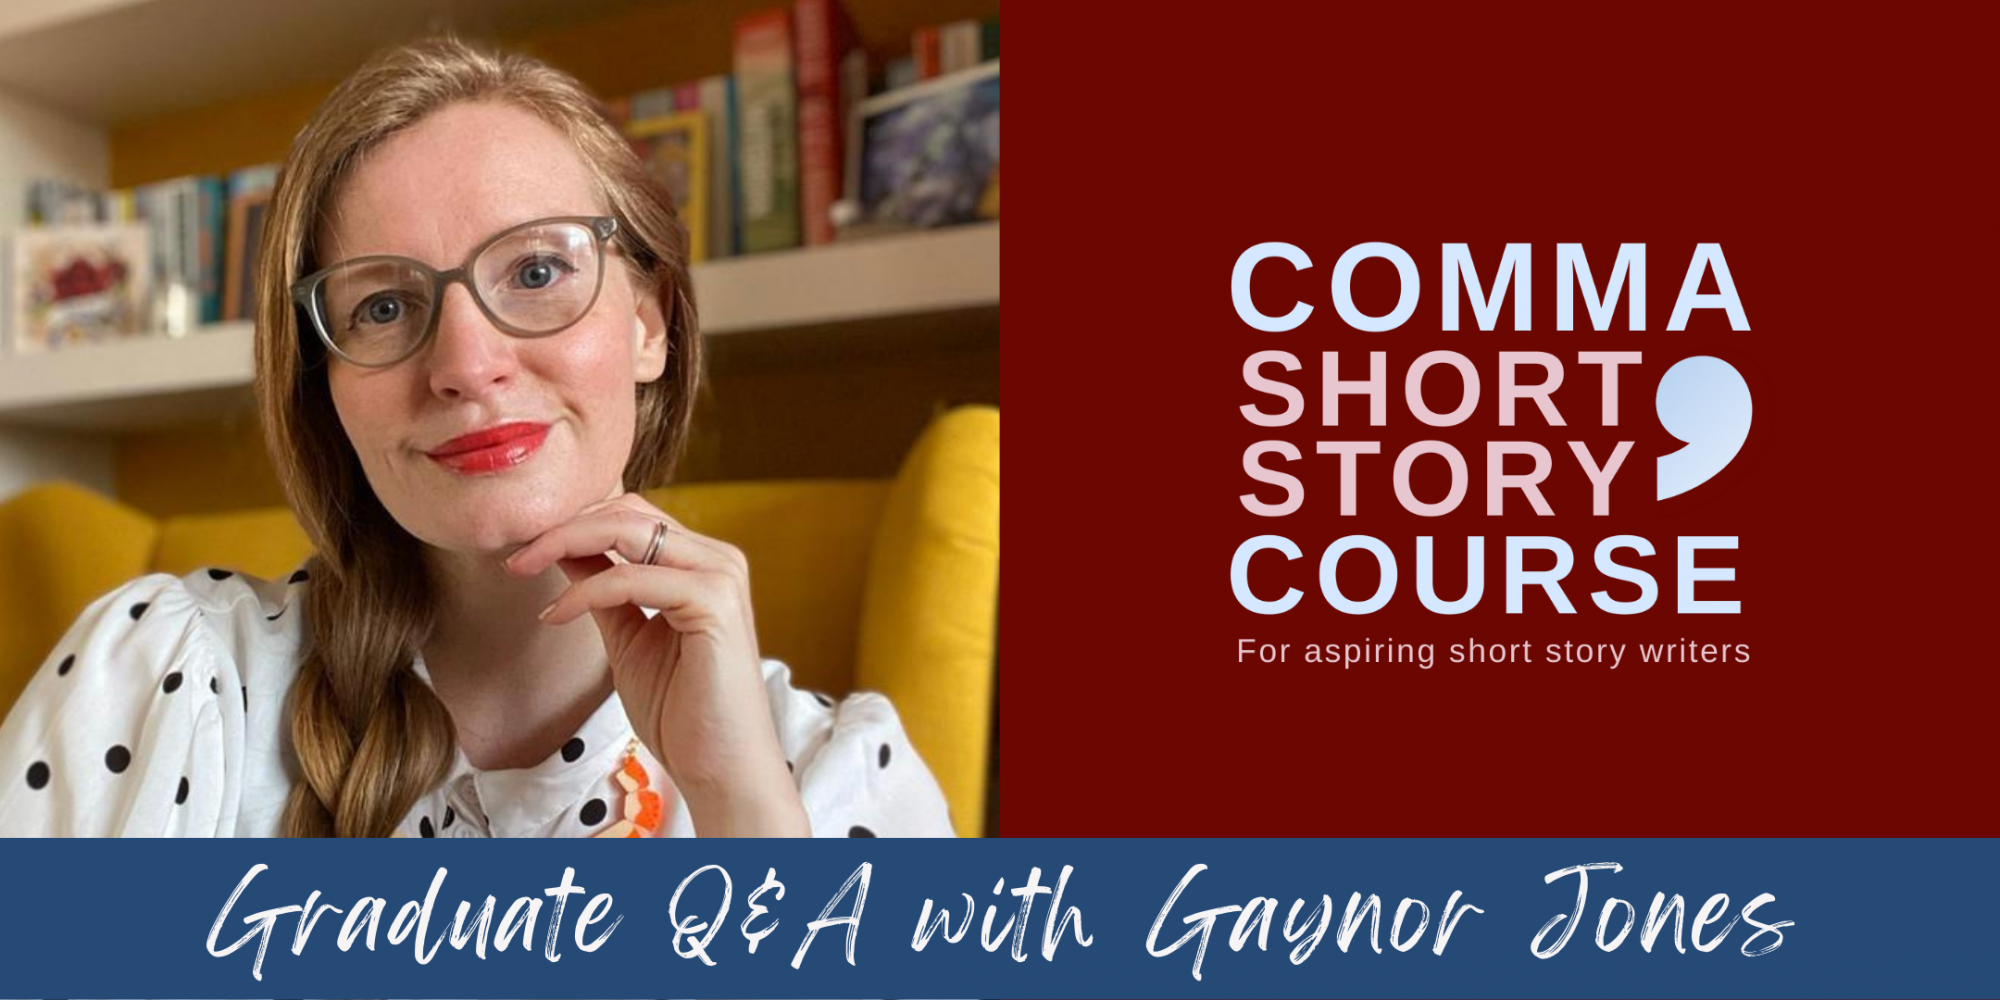 Comma Short Story Course: Q + A with Gaynor Jones cover image